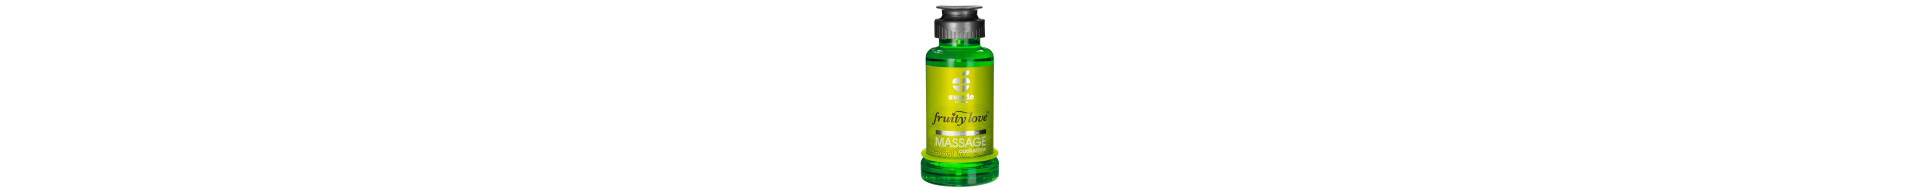 Creams and Oils for Massages